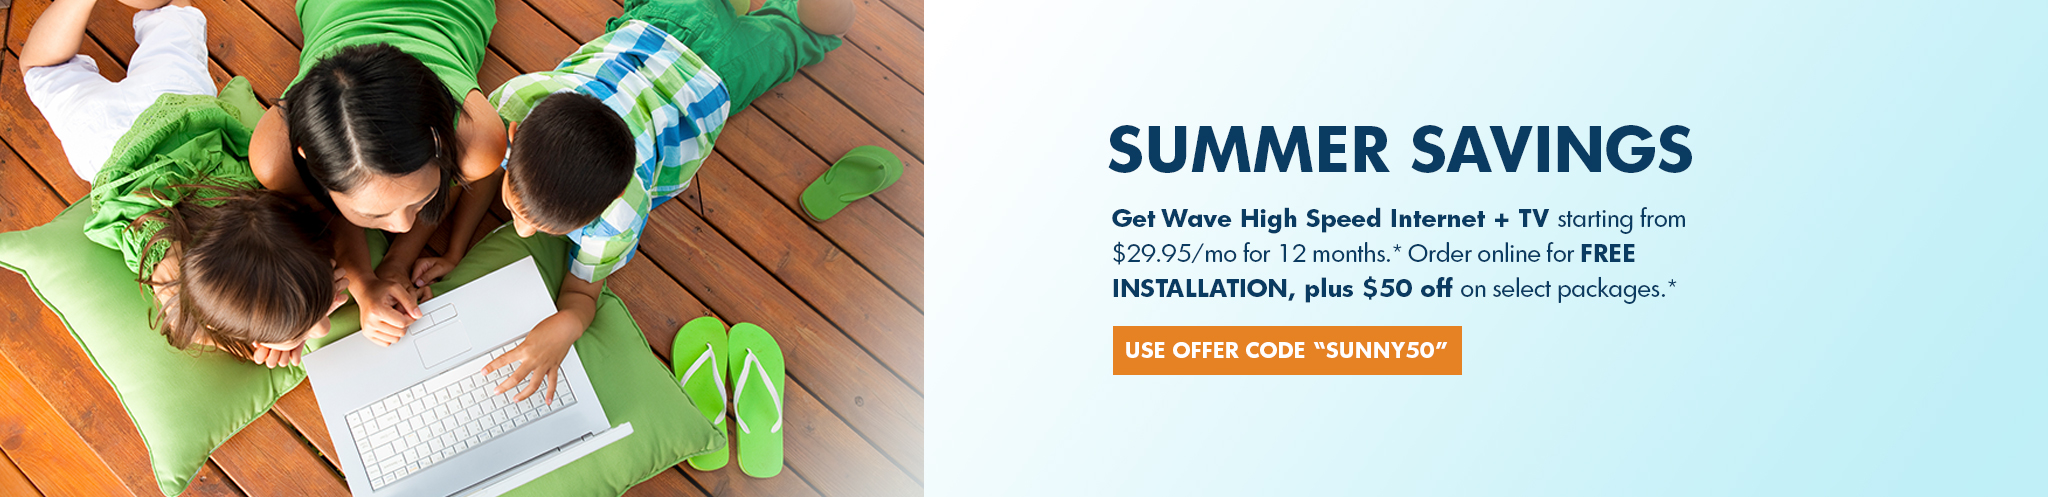 Bundle with Wave and get $50 Off and Free Install*